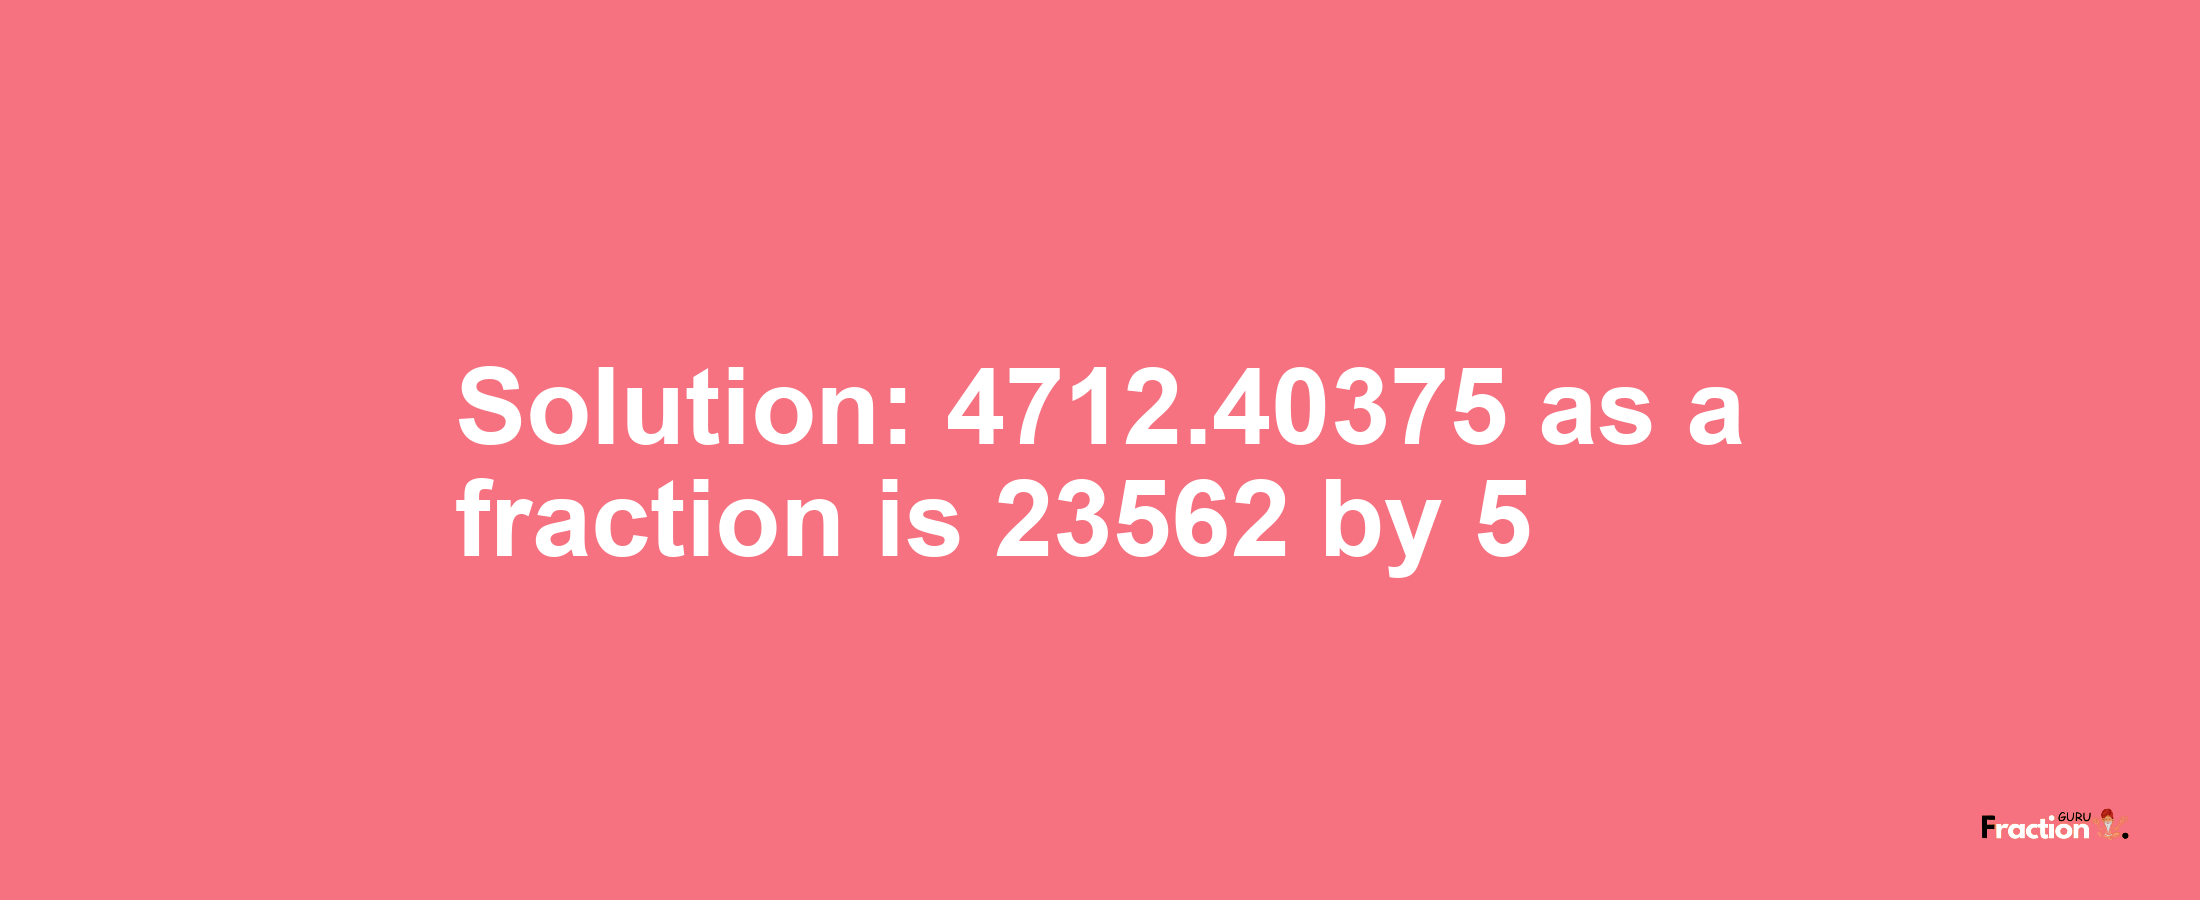 Solution:4712.40375 as a fraction is 23562/5